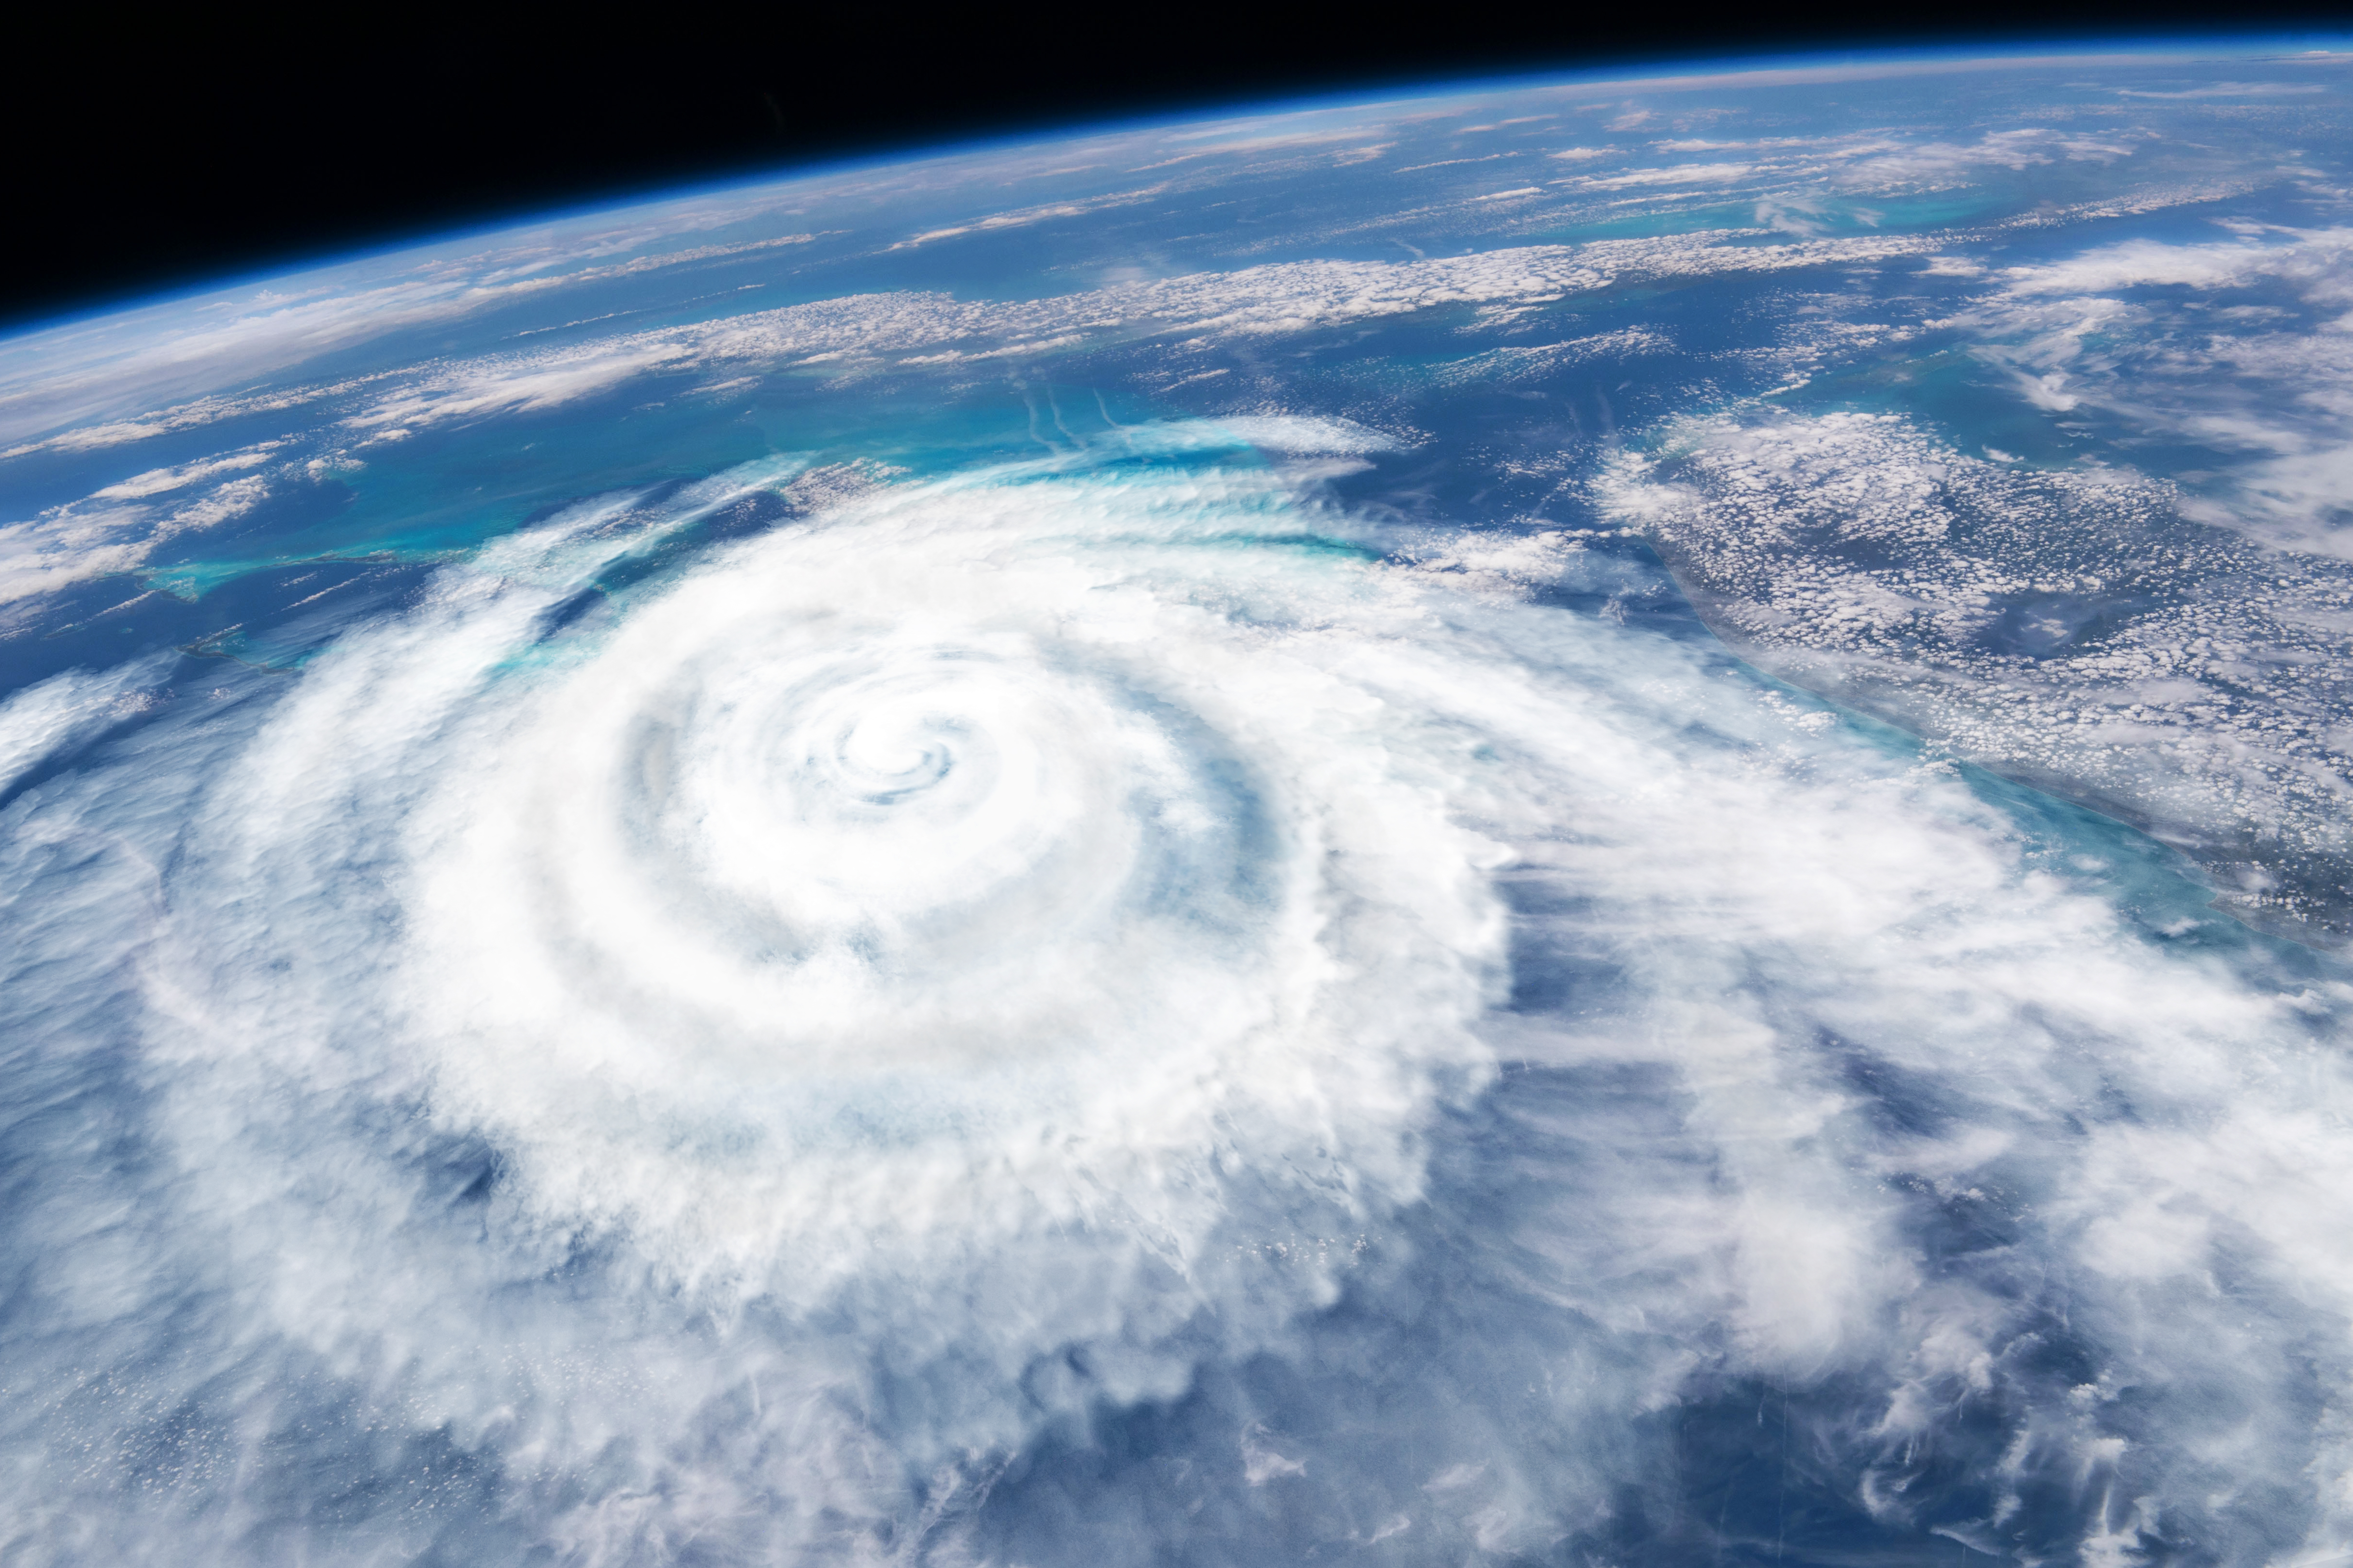 What is a hurricane? A hurricane is a great spinning mass of air, with  clouds and rain, where the winds continually blow at over 74 miles an hour.